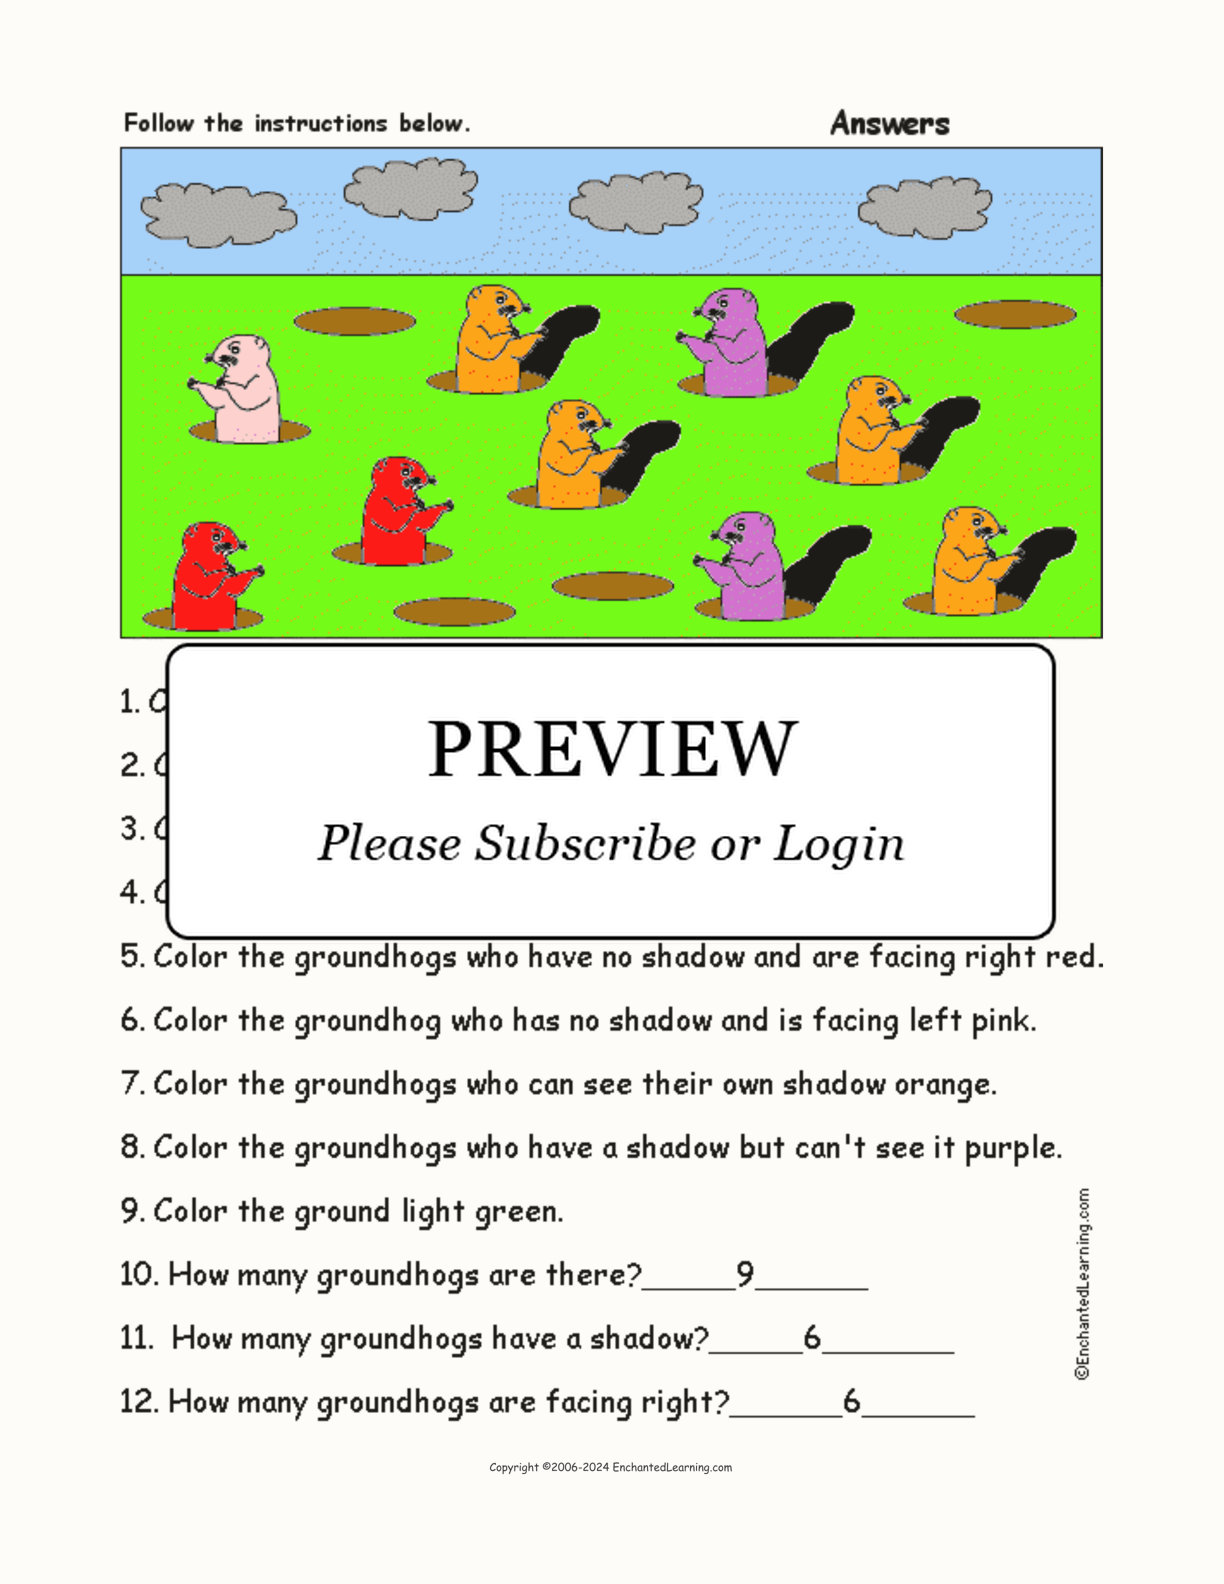 Groundhog Day - Follow the Instructions interactive worksheet page 2